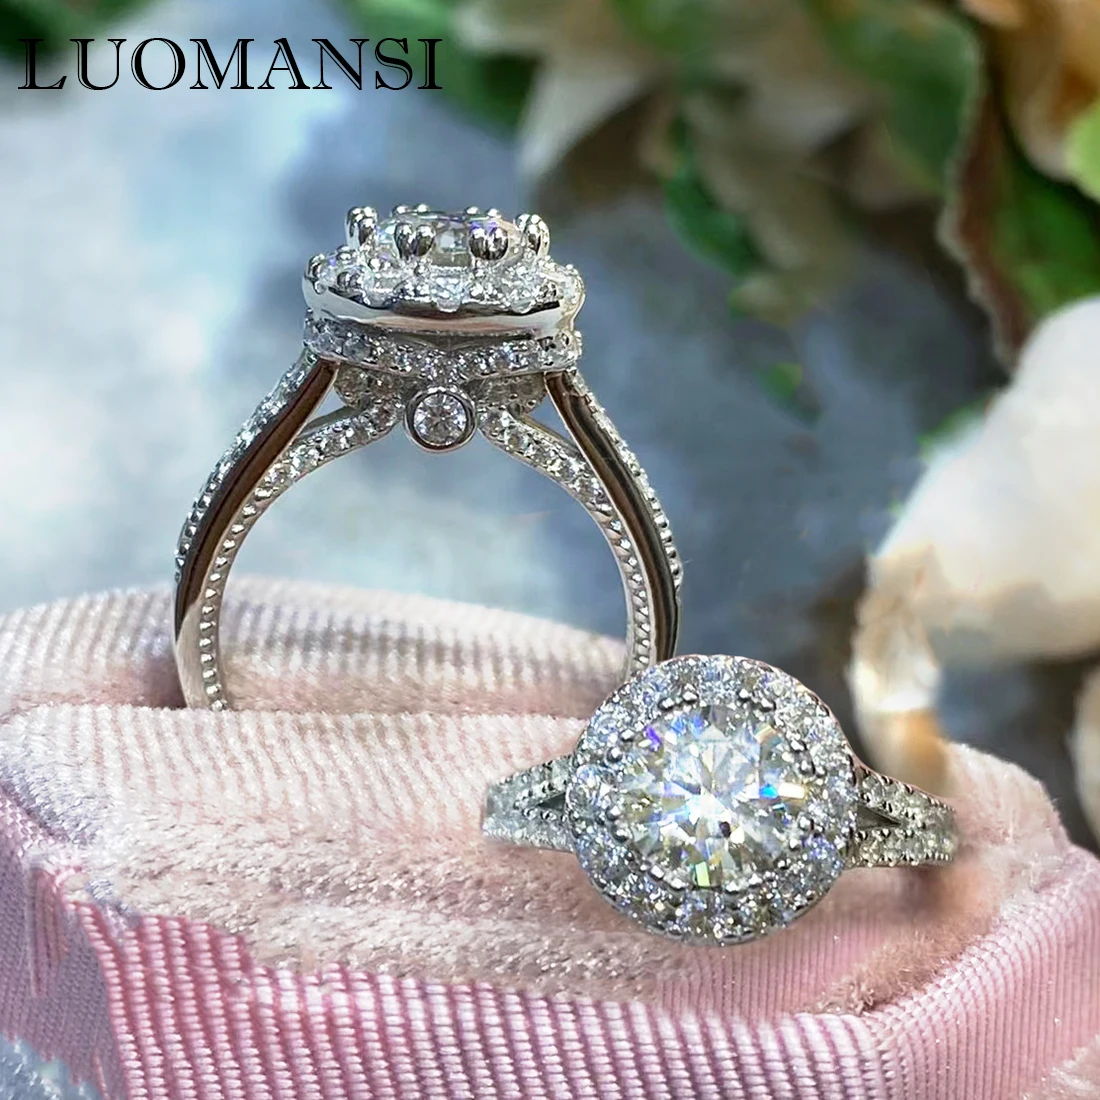 Luomansi Woman Ring Silver 1 / 2 Carat D VVS Moissanite with GRA Certificate Super Flash S925 Jewelry Wedding Party Gift